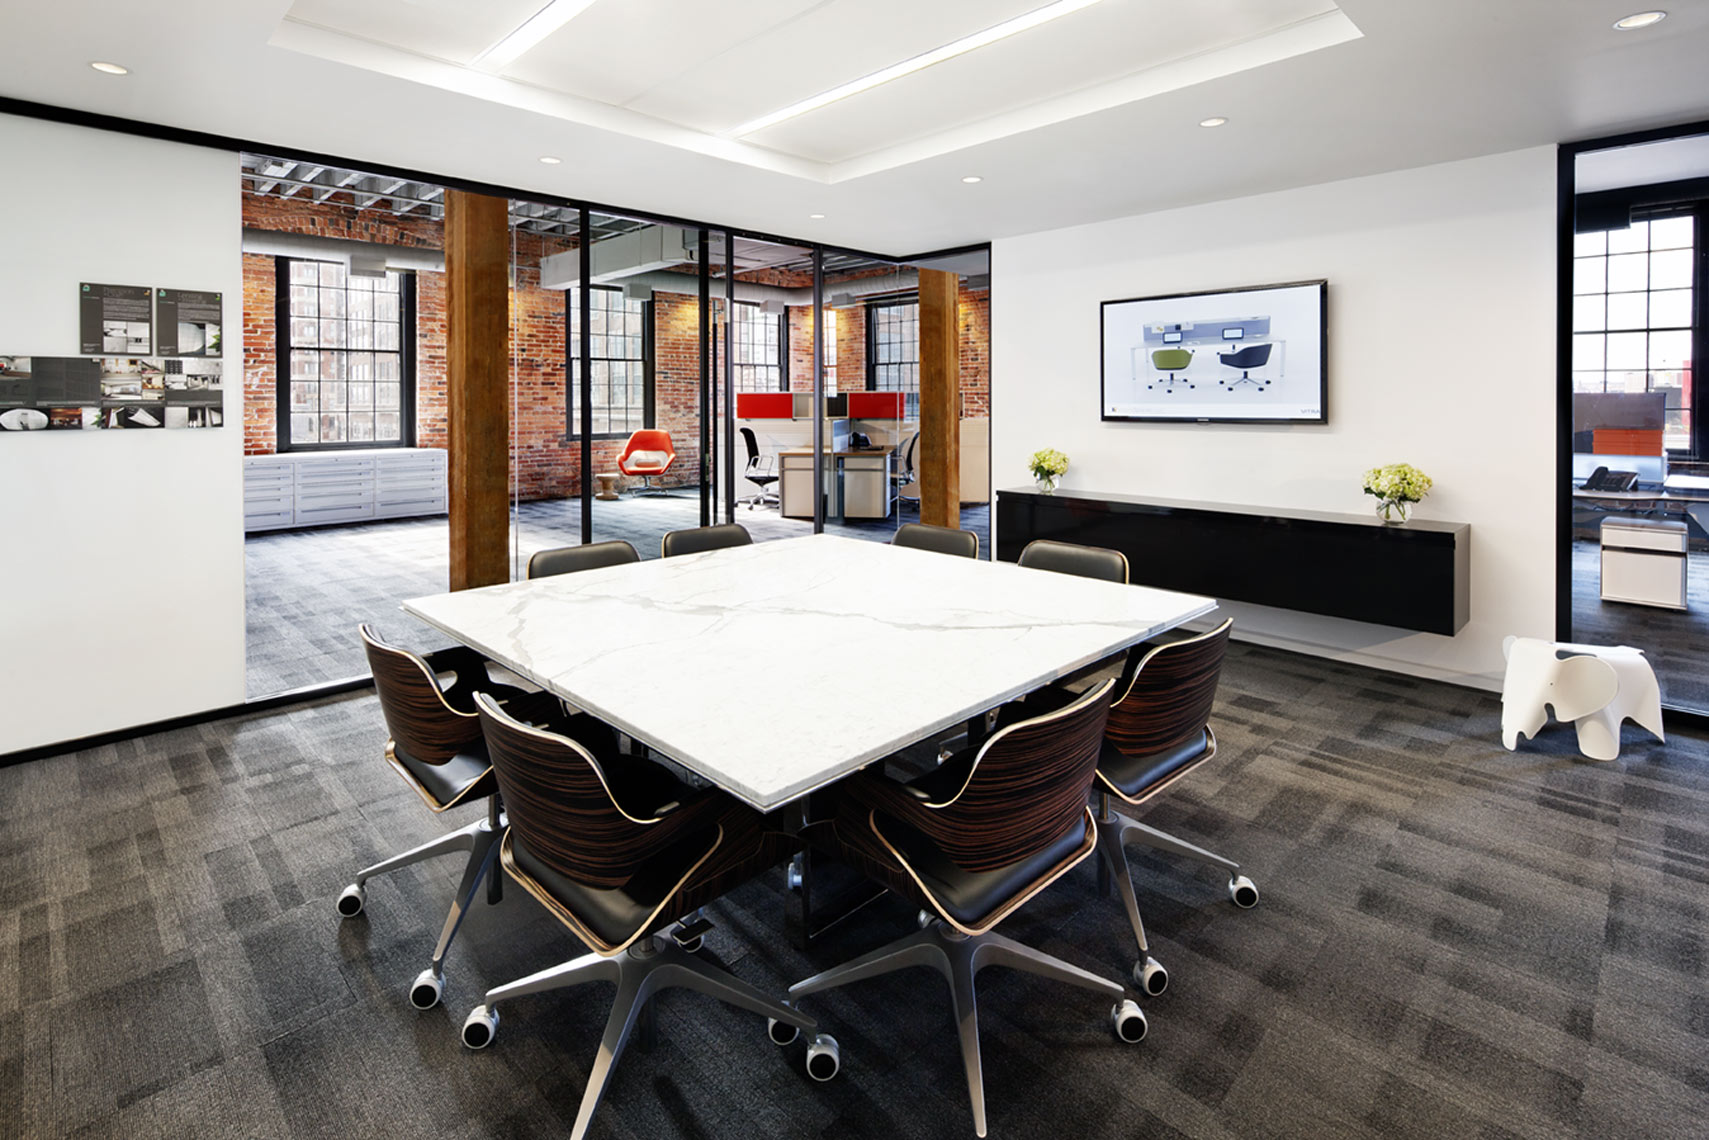 Architectural photograph of an office conference room